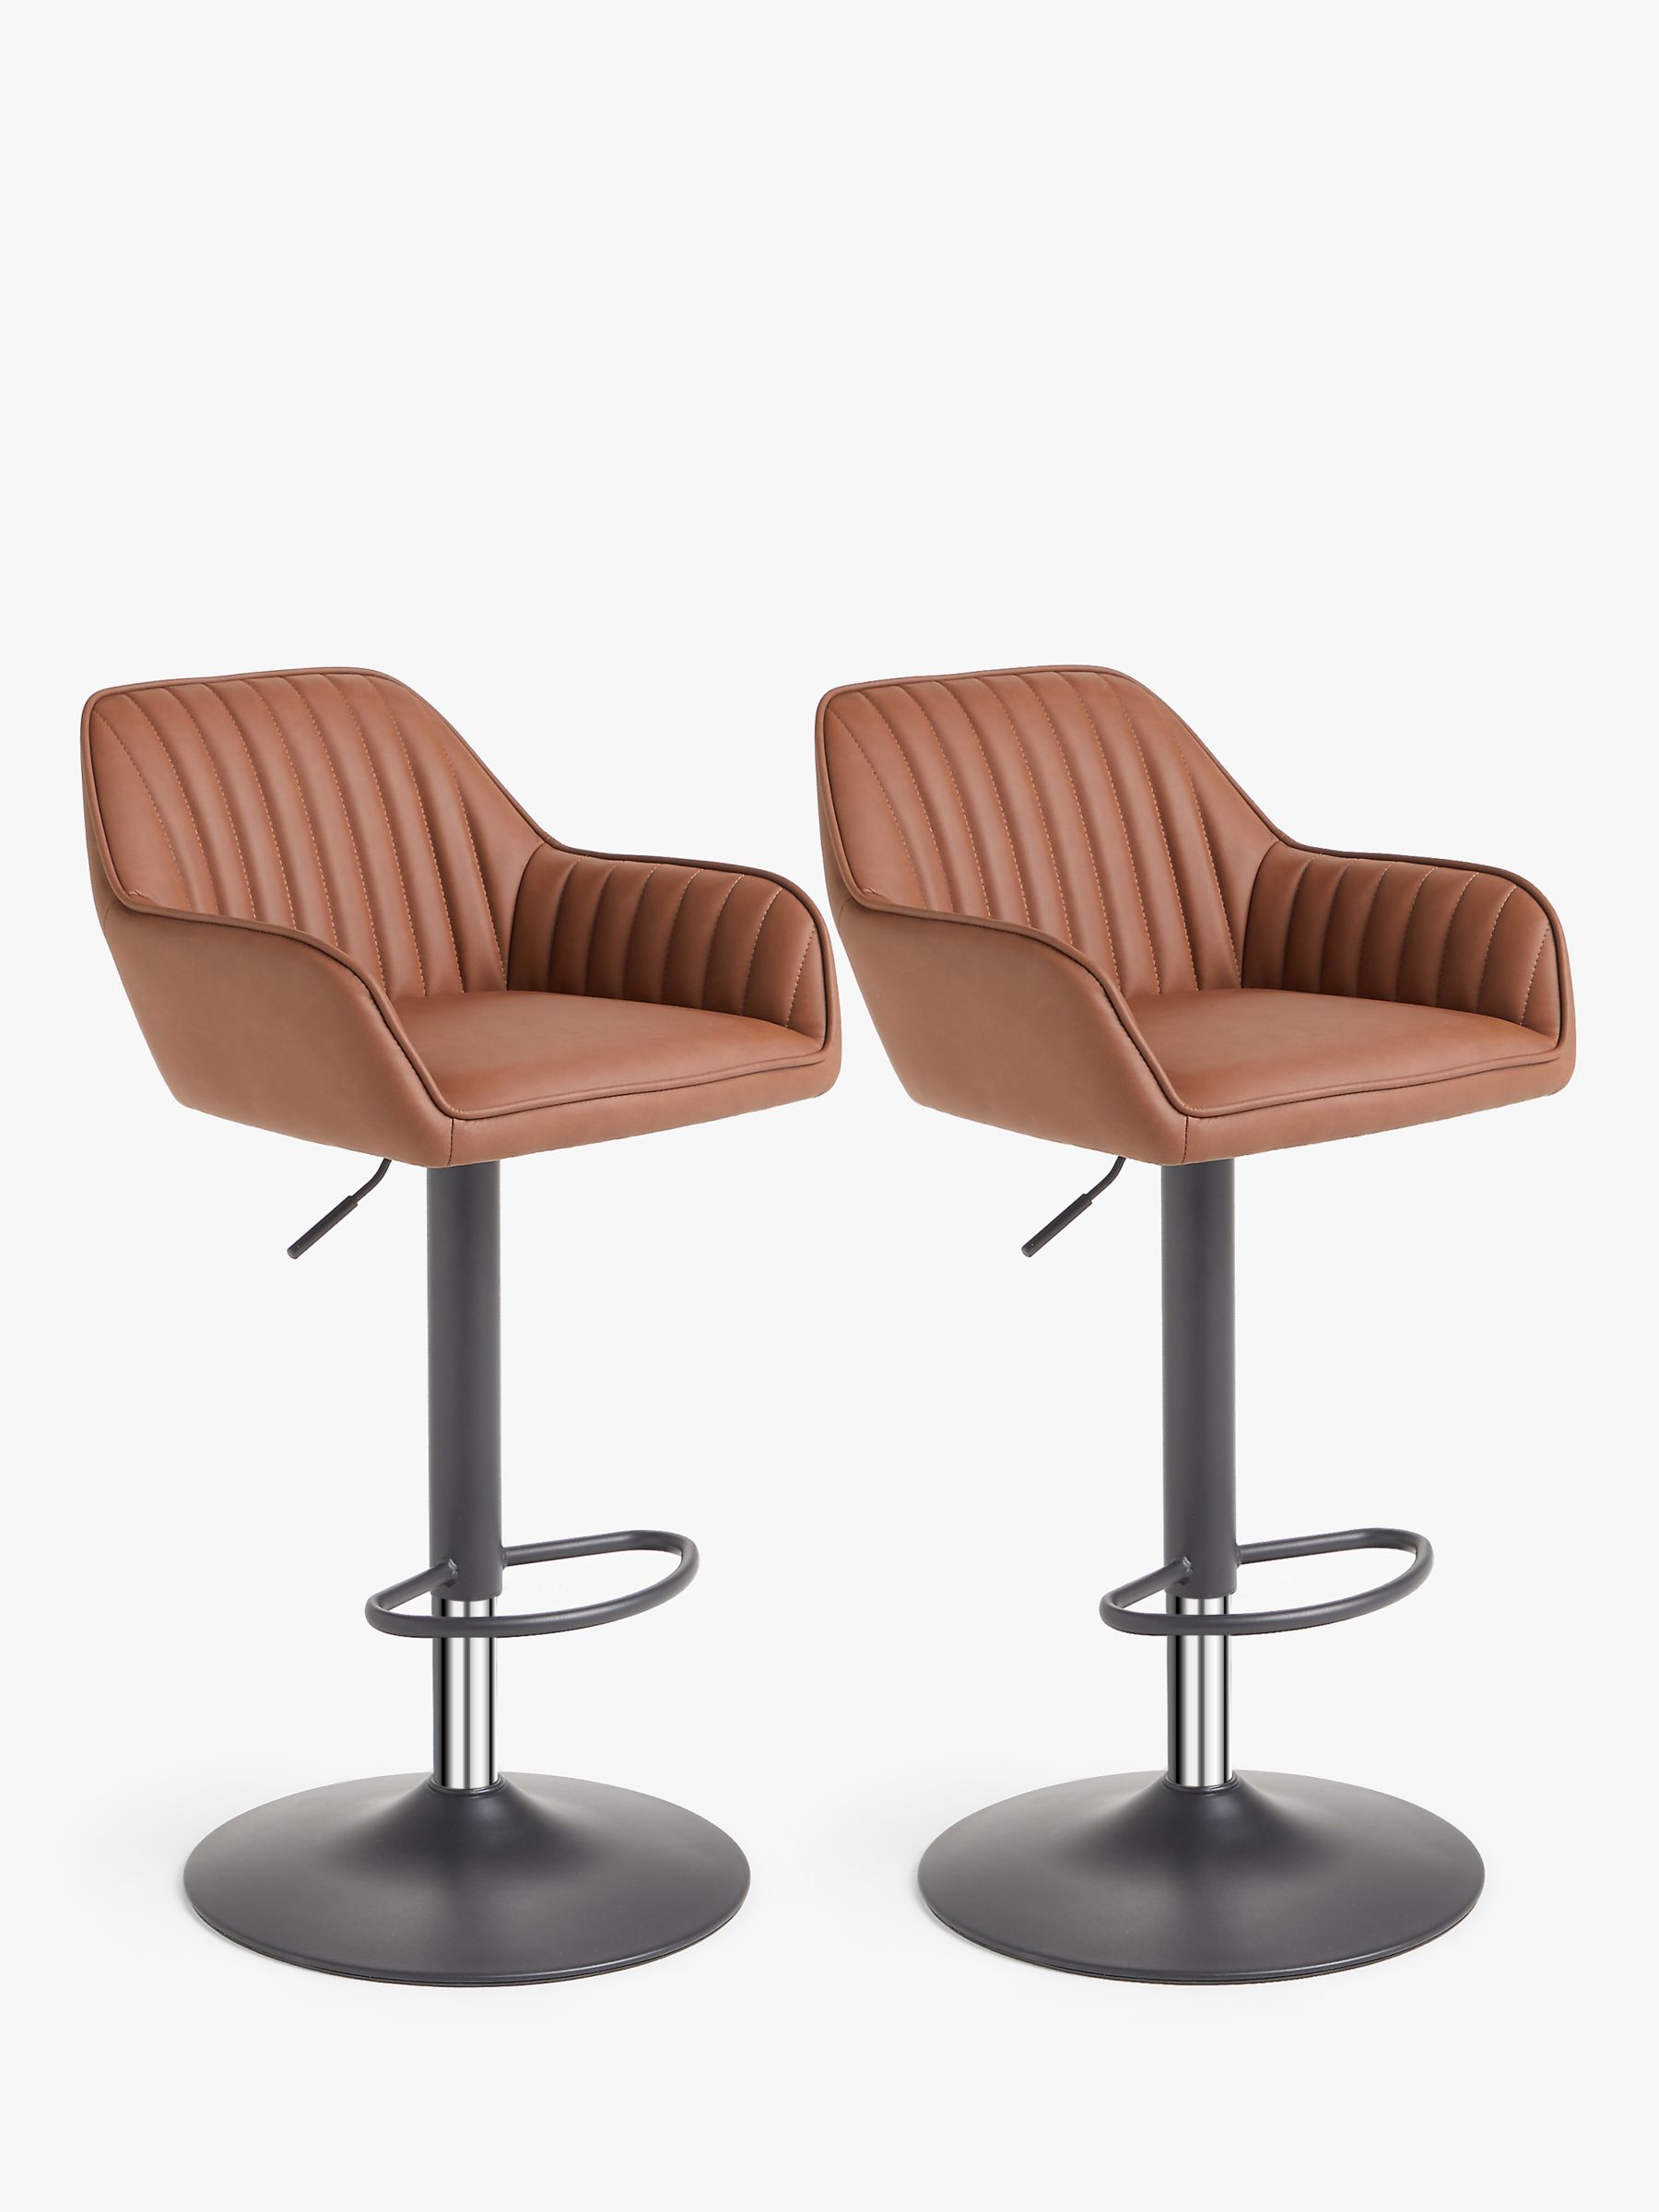 John Lewis Bar Chairs Stools, Real Leather Bar Stools With Backs And Arms